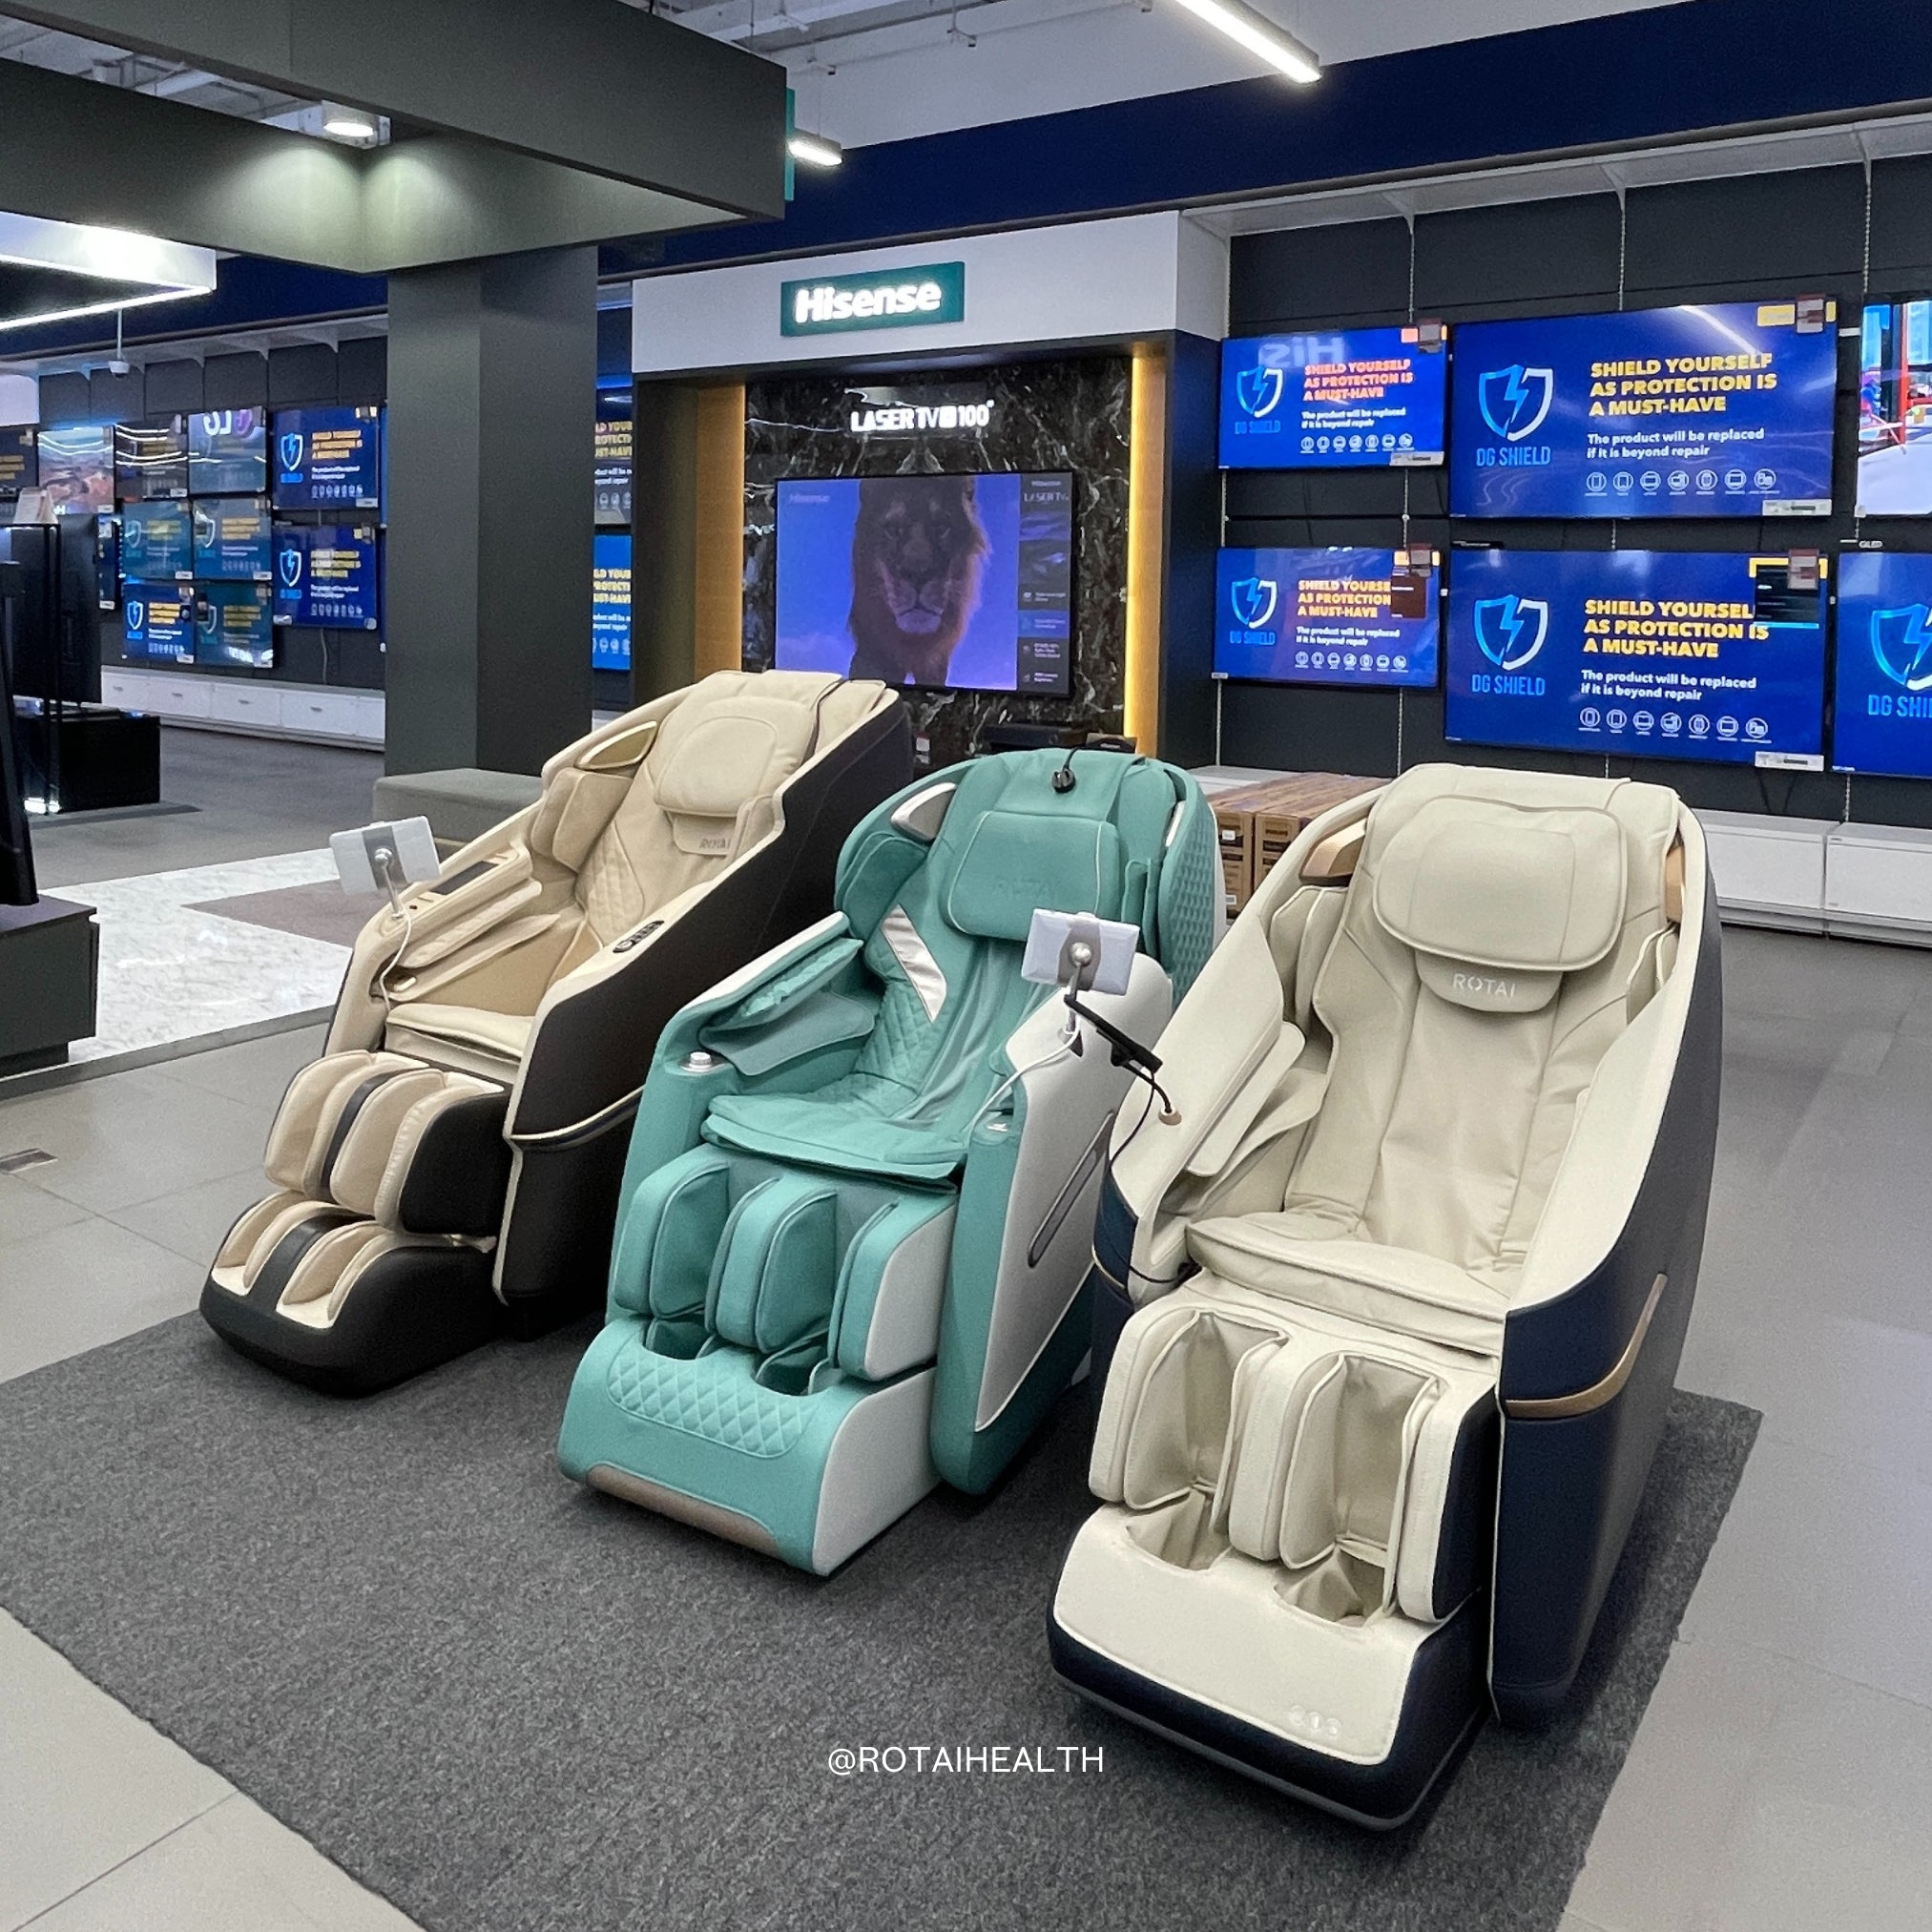 Discover ultimate relaxation with our range of massage chairs and devices. Experience comfort and relief like never before. Massage Chairs UAE | 30-75% OFF | Dubai, Abu Dhabi Wide Range of Massage Chairs at best price in Dubai, UAE